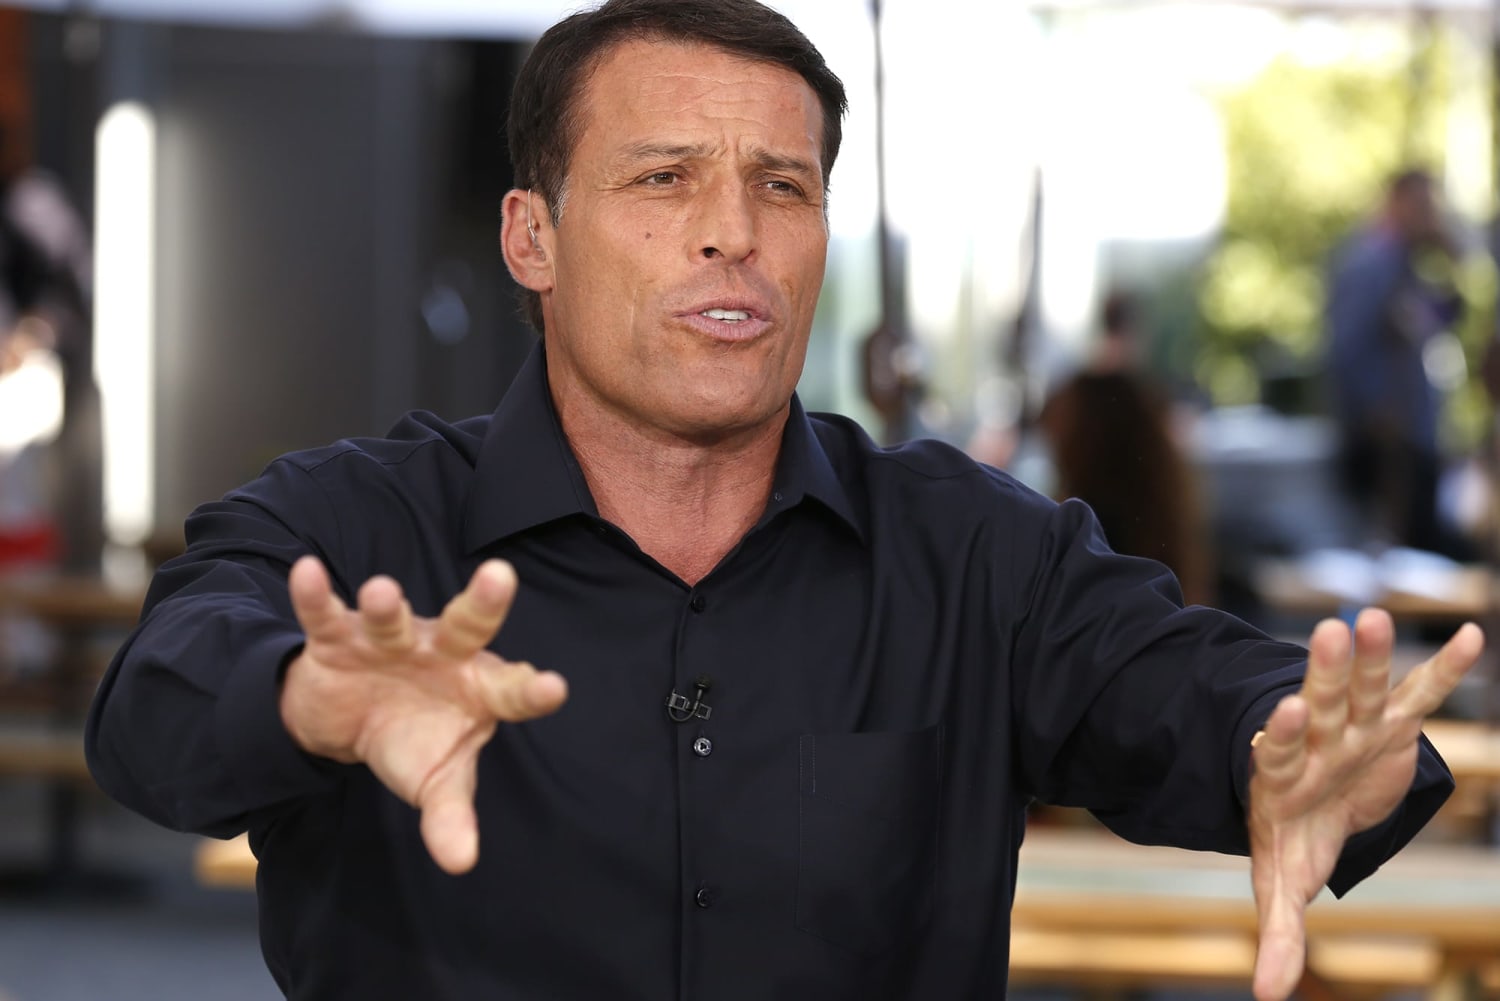 These are the 3 books that Tony Robbins is reading right now to stay inspired